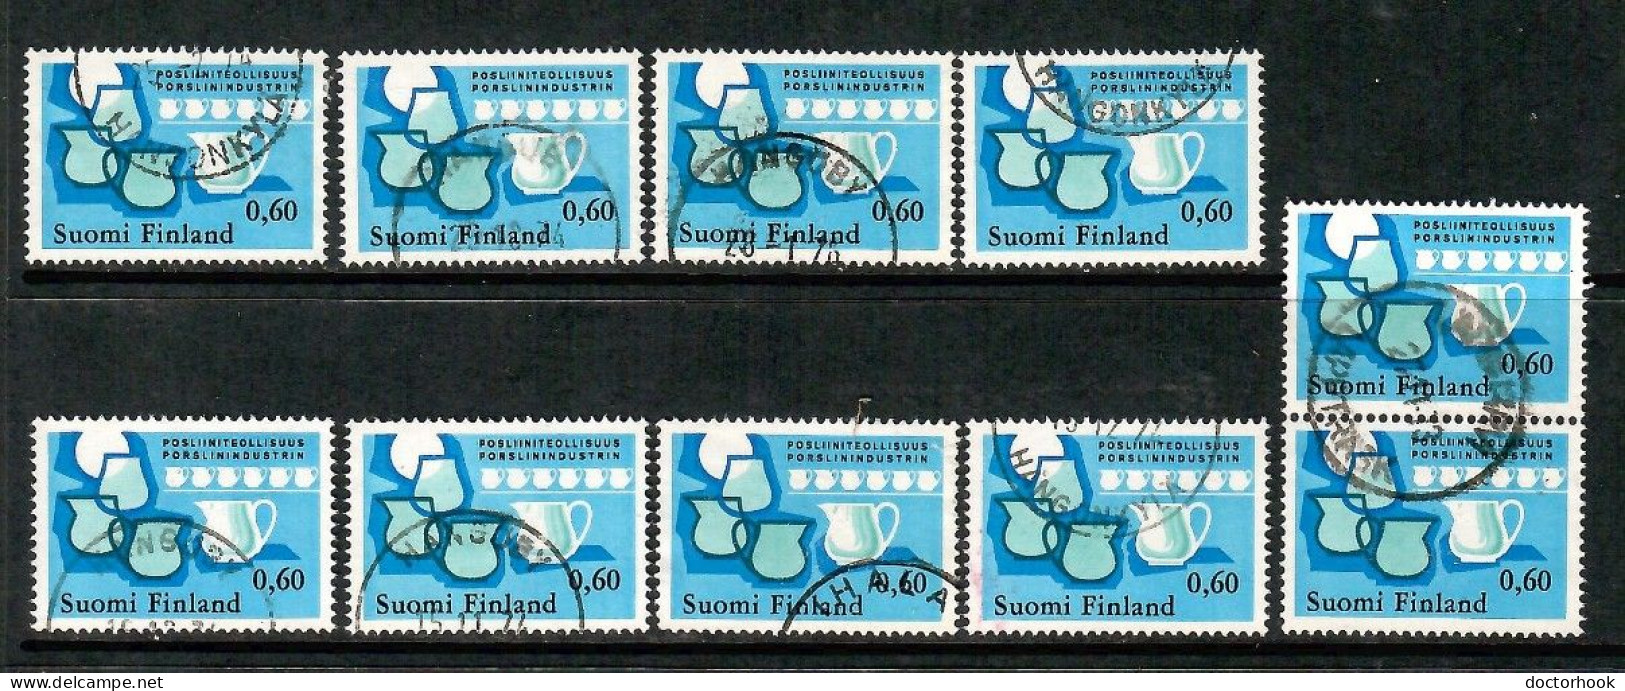 FINLAND   Scott # 541 USED WHOLESALE LOT OF 10 (CONDITION AS PER SCAN) (WH-631) - Colecciones